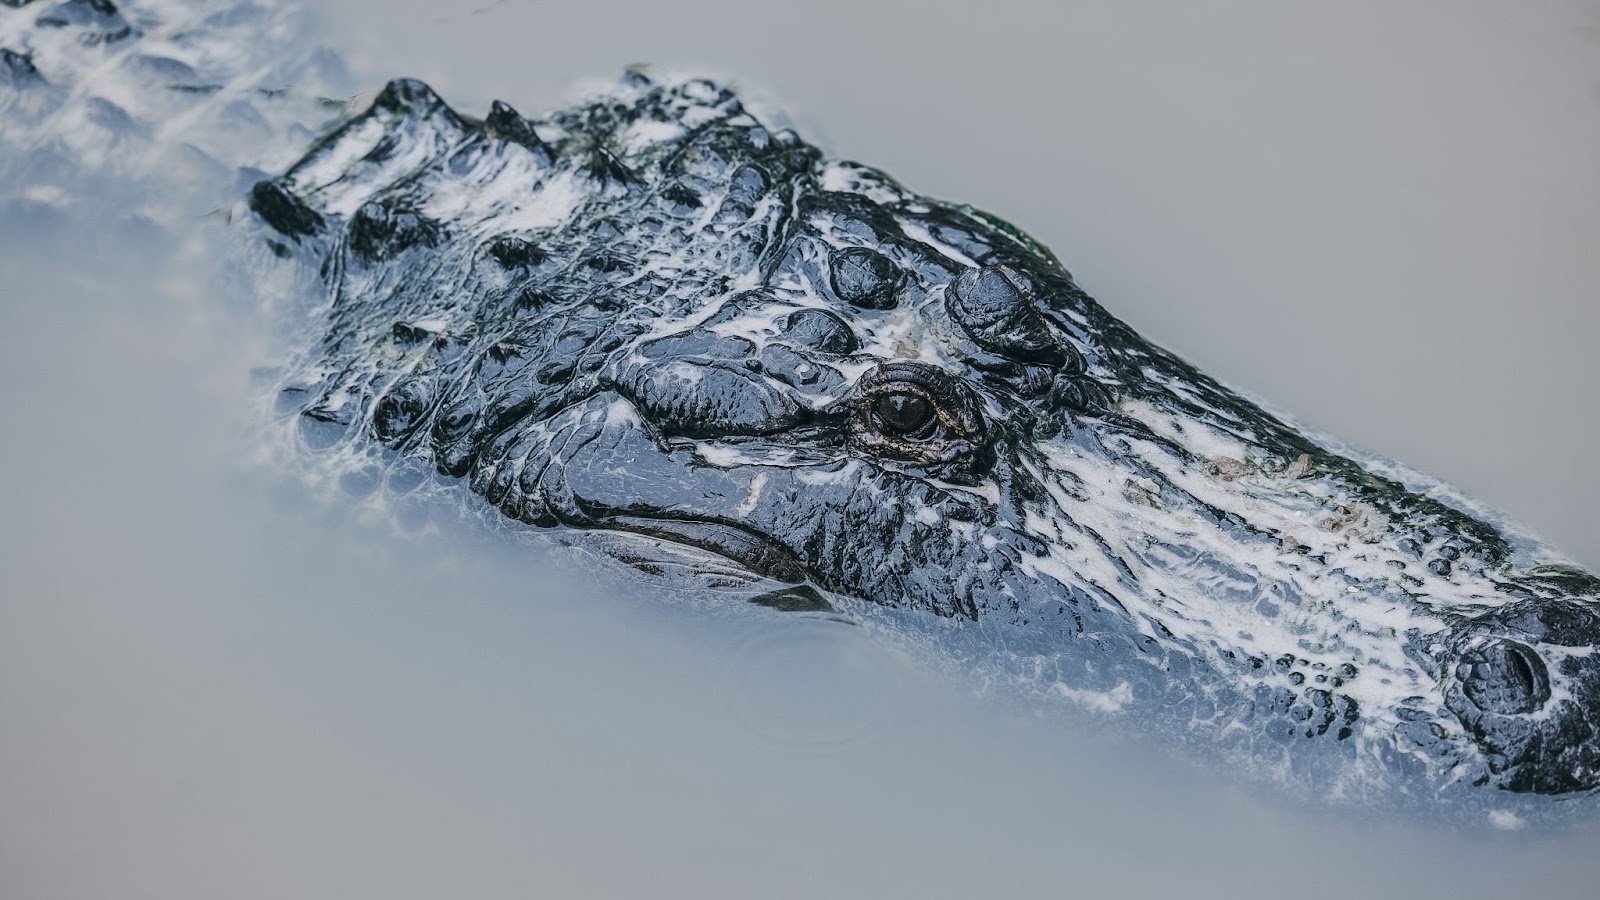 An adult crocodile peeks out of the water at the Wild Florida Everglades